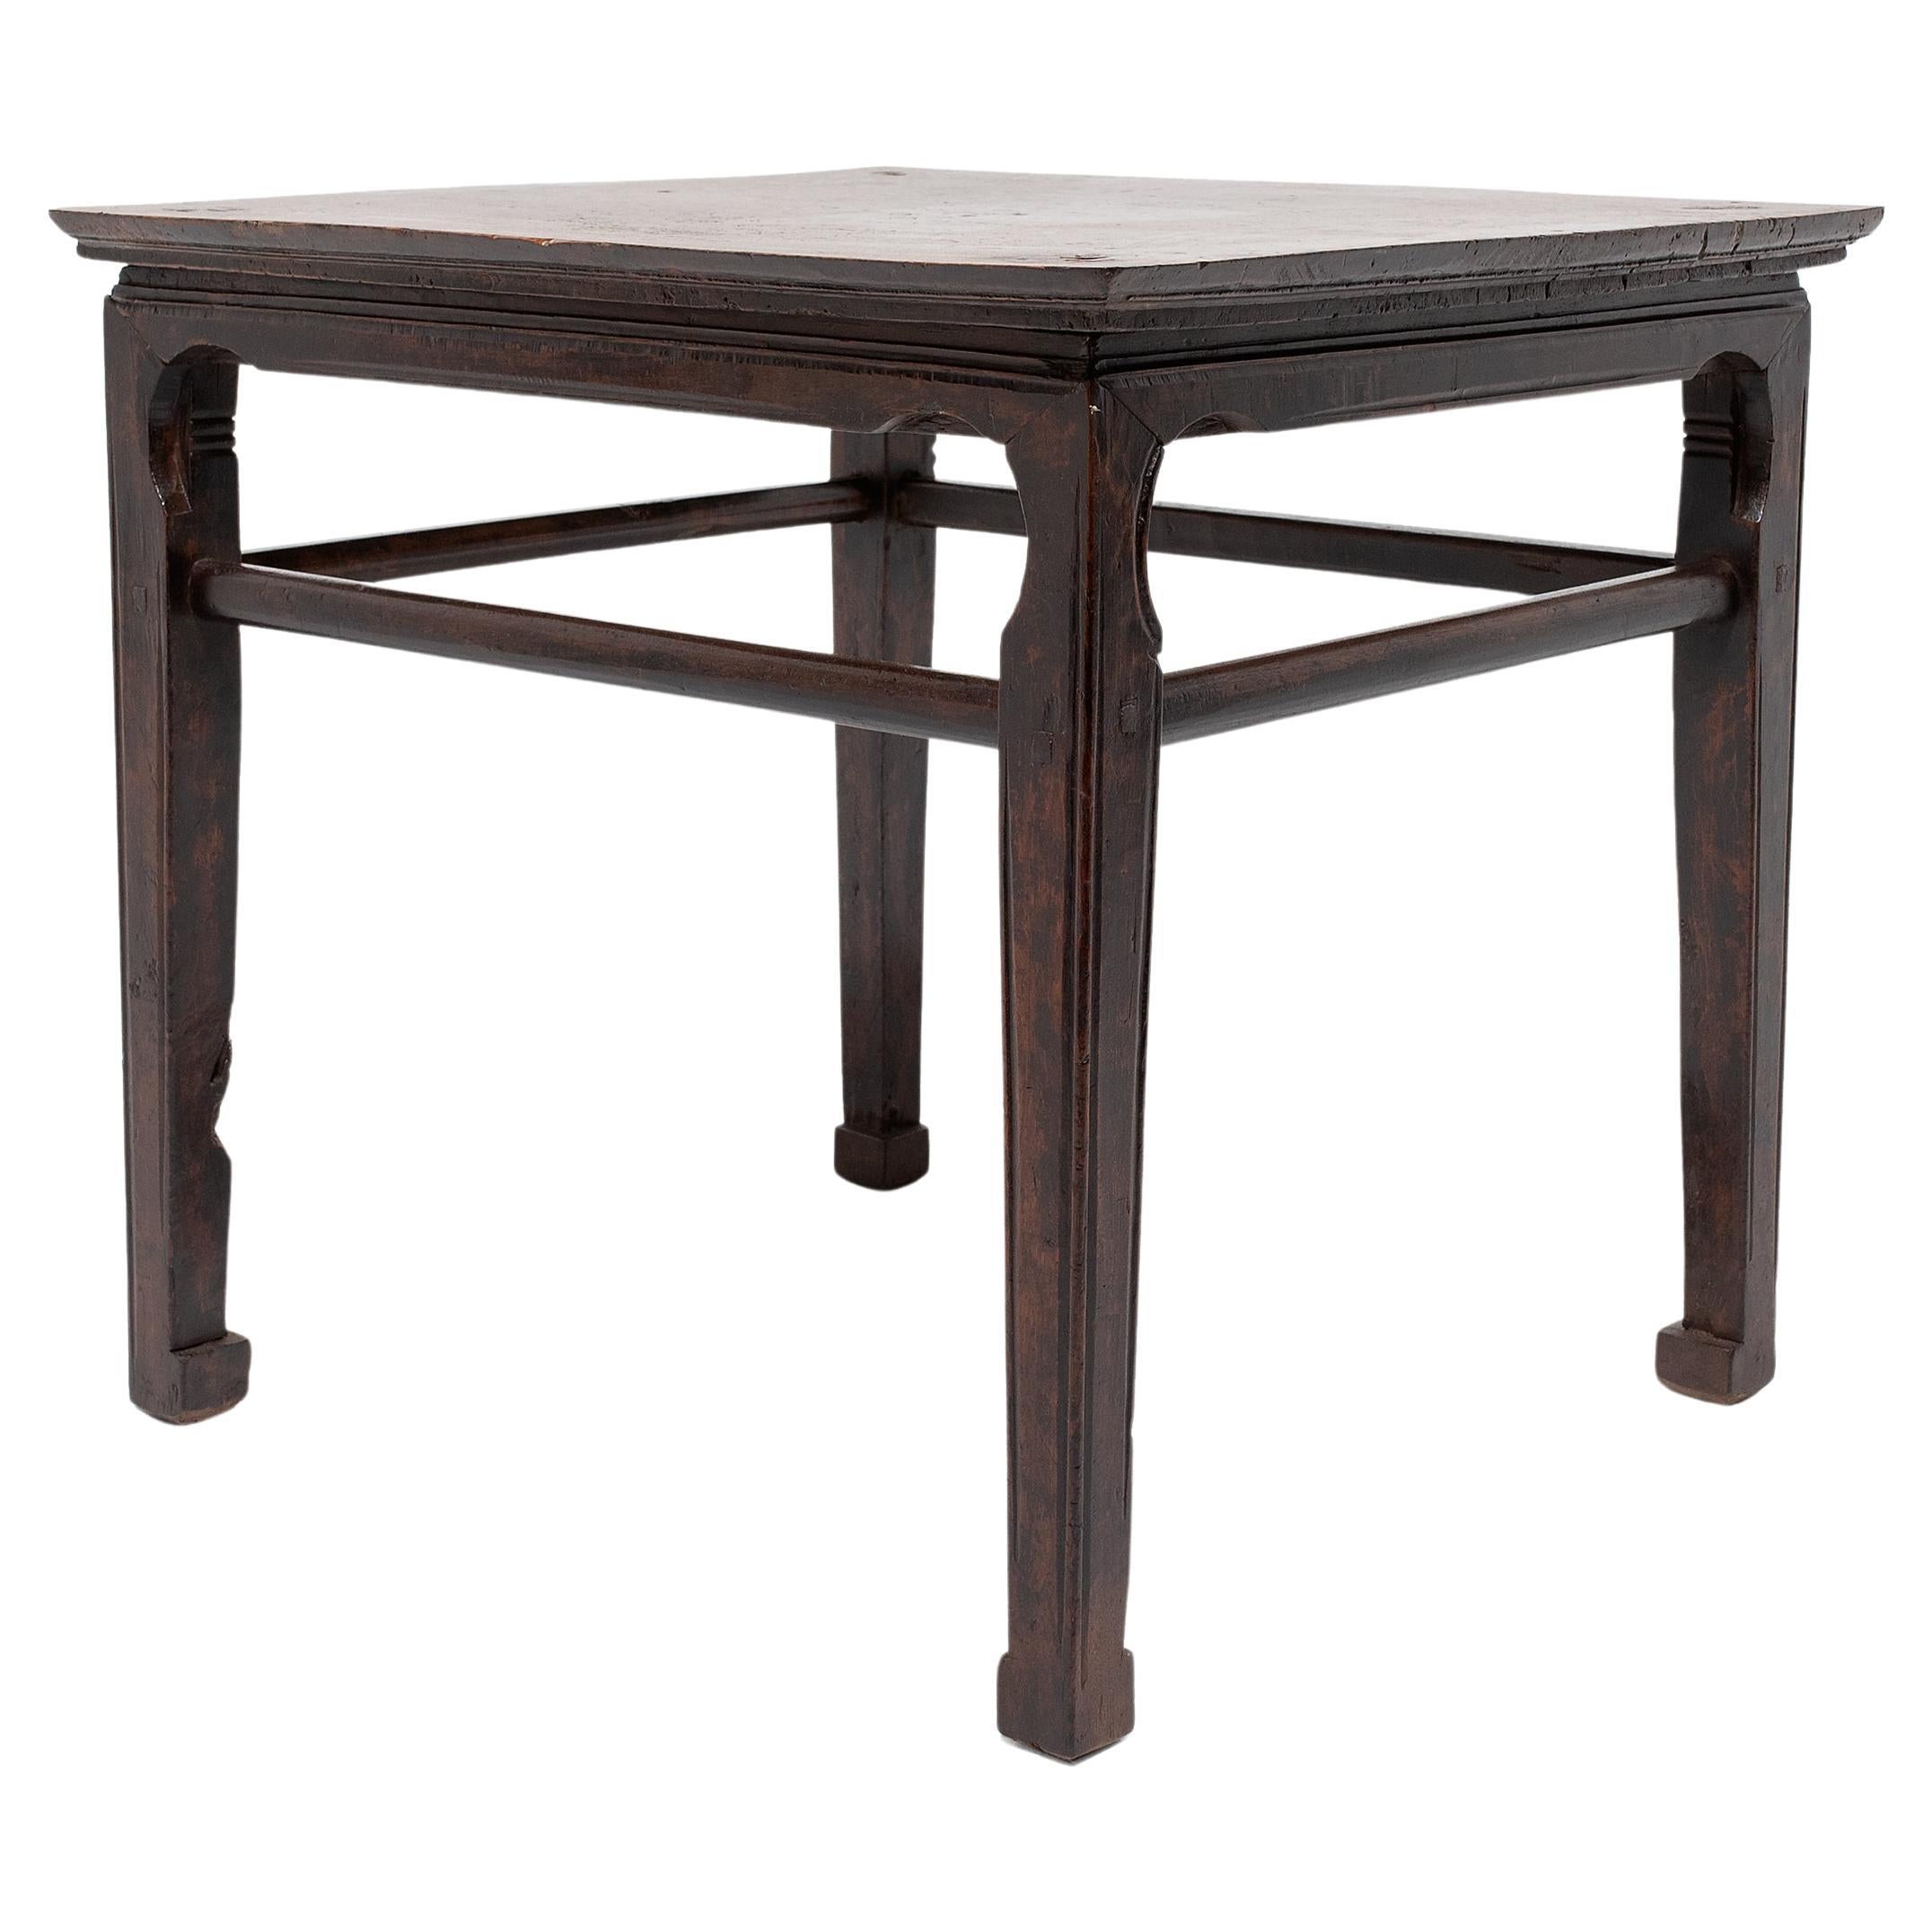 Chinese Square Burlwood Table, c. 1850 For Sale